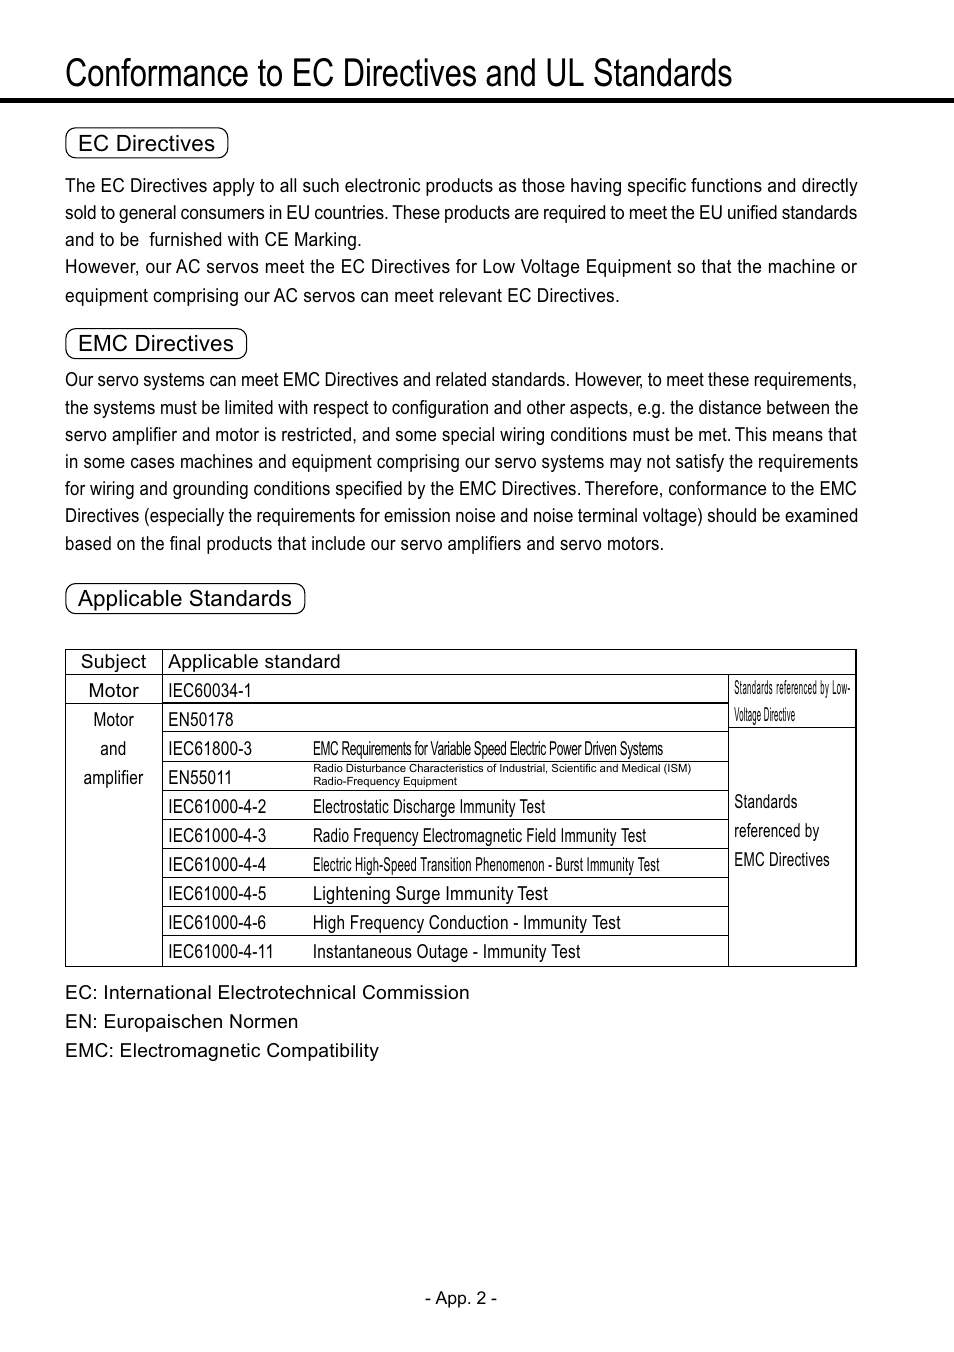 Conformance to ec directives and ul standards, Conform to ec directives and ul standards, App. 2 | Panasonic MDDDT5540 User Manual | Page 76 / 133